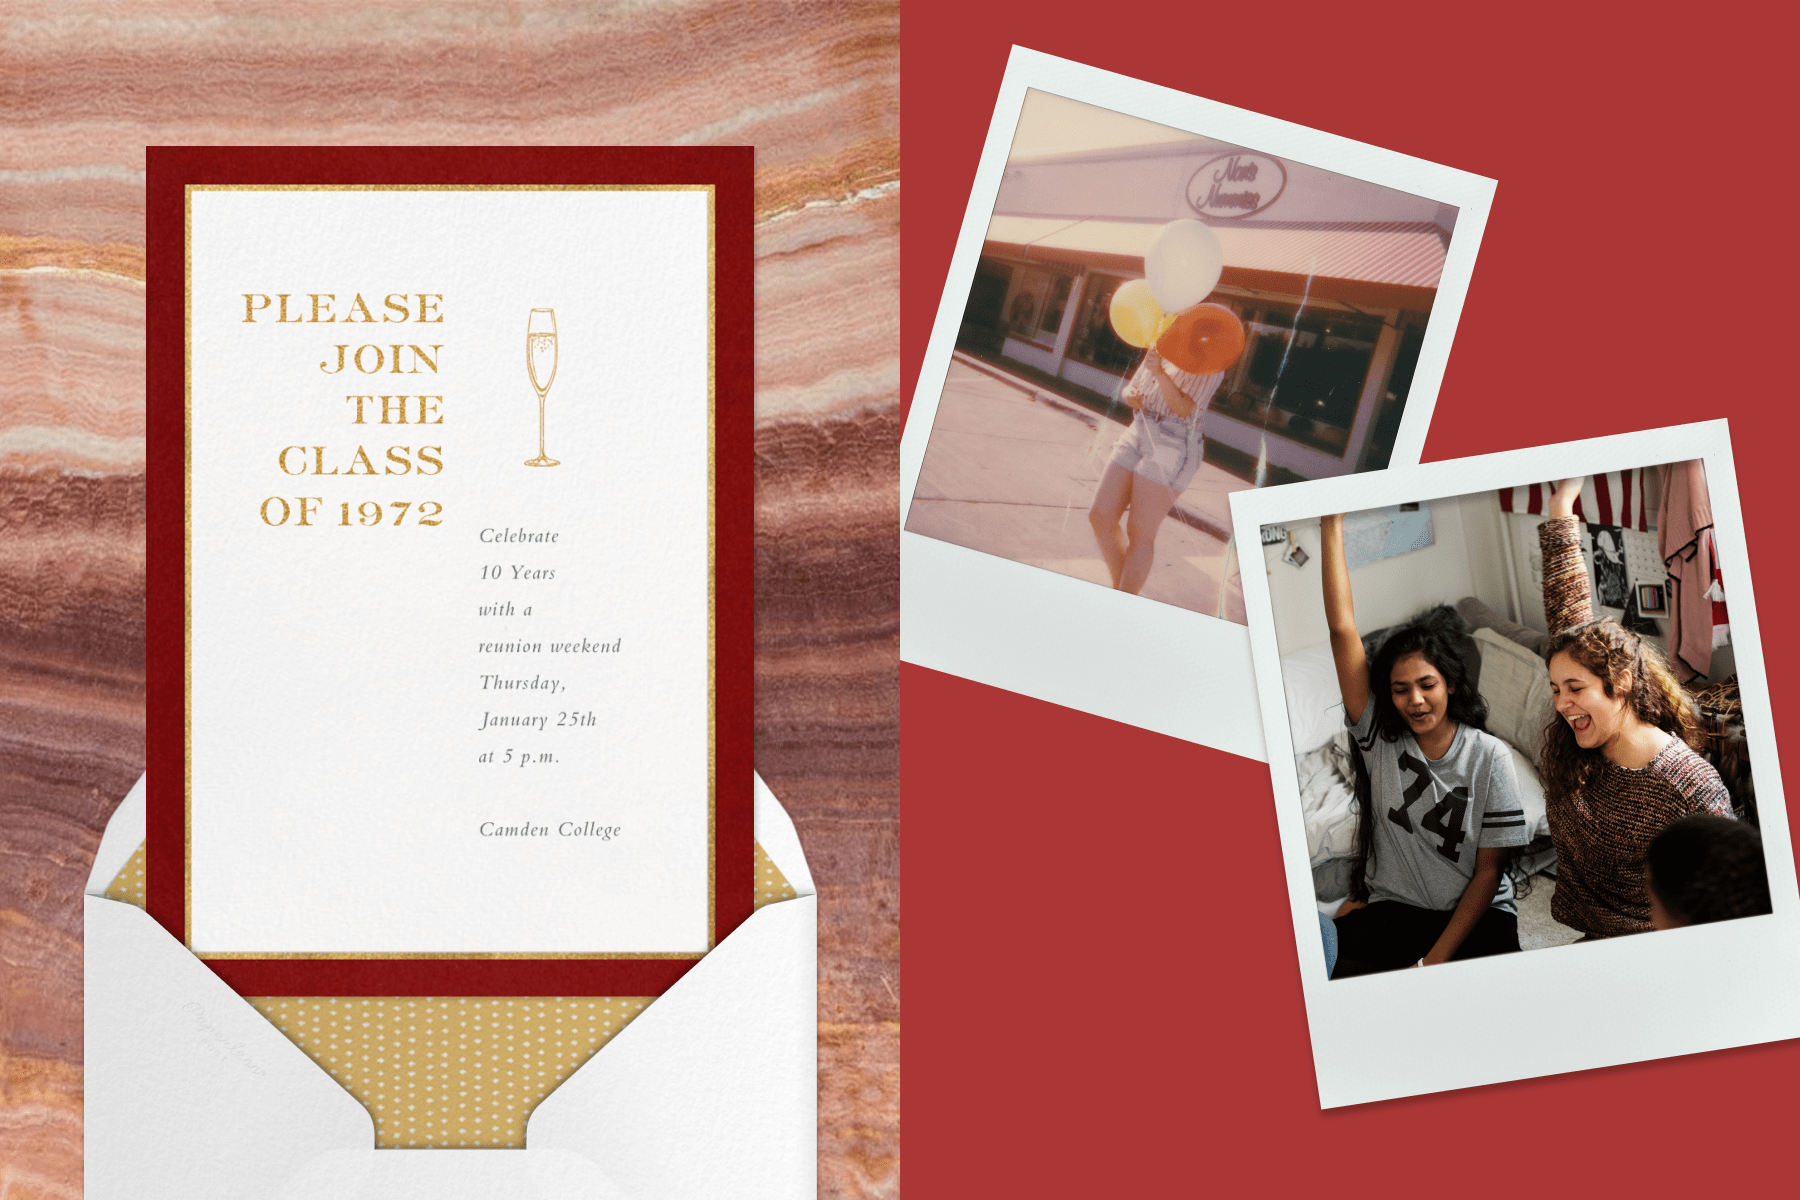 A white and gold reunion invitation with a maroon border; Vintage-looking Polaroid photos on a maroon background.